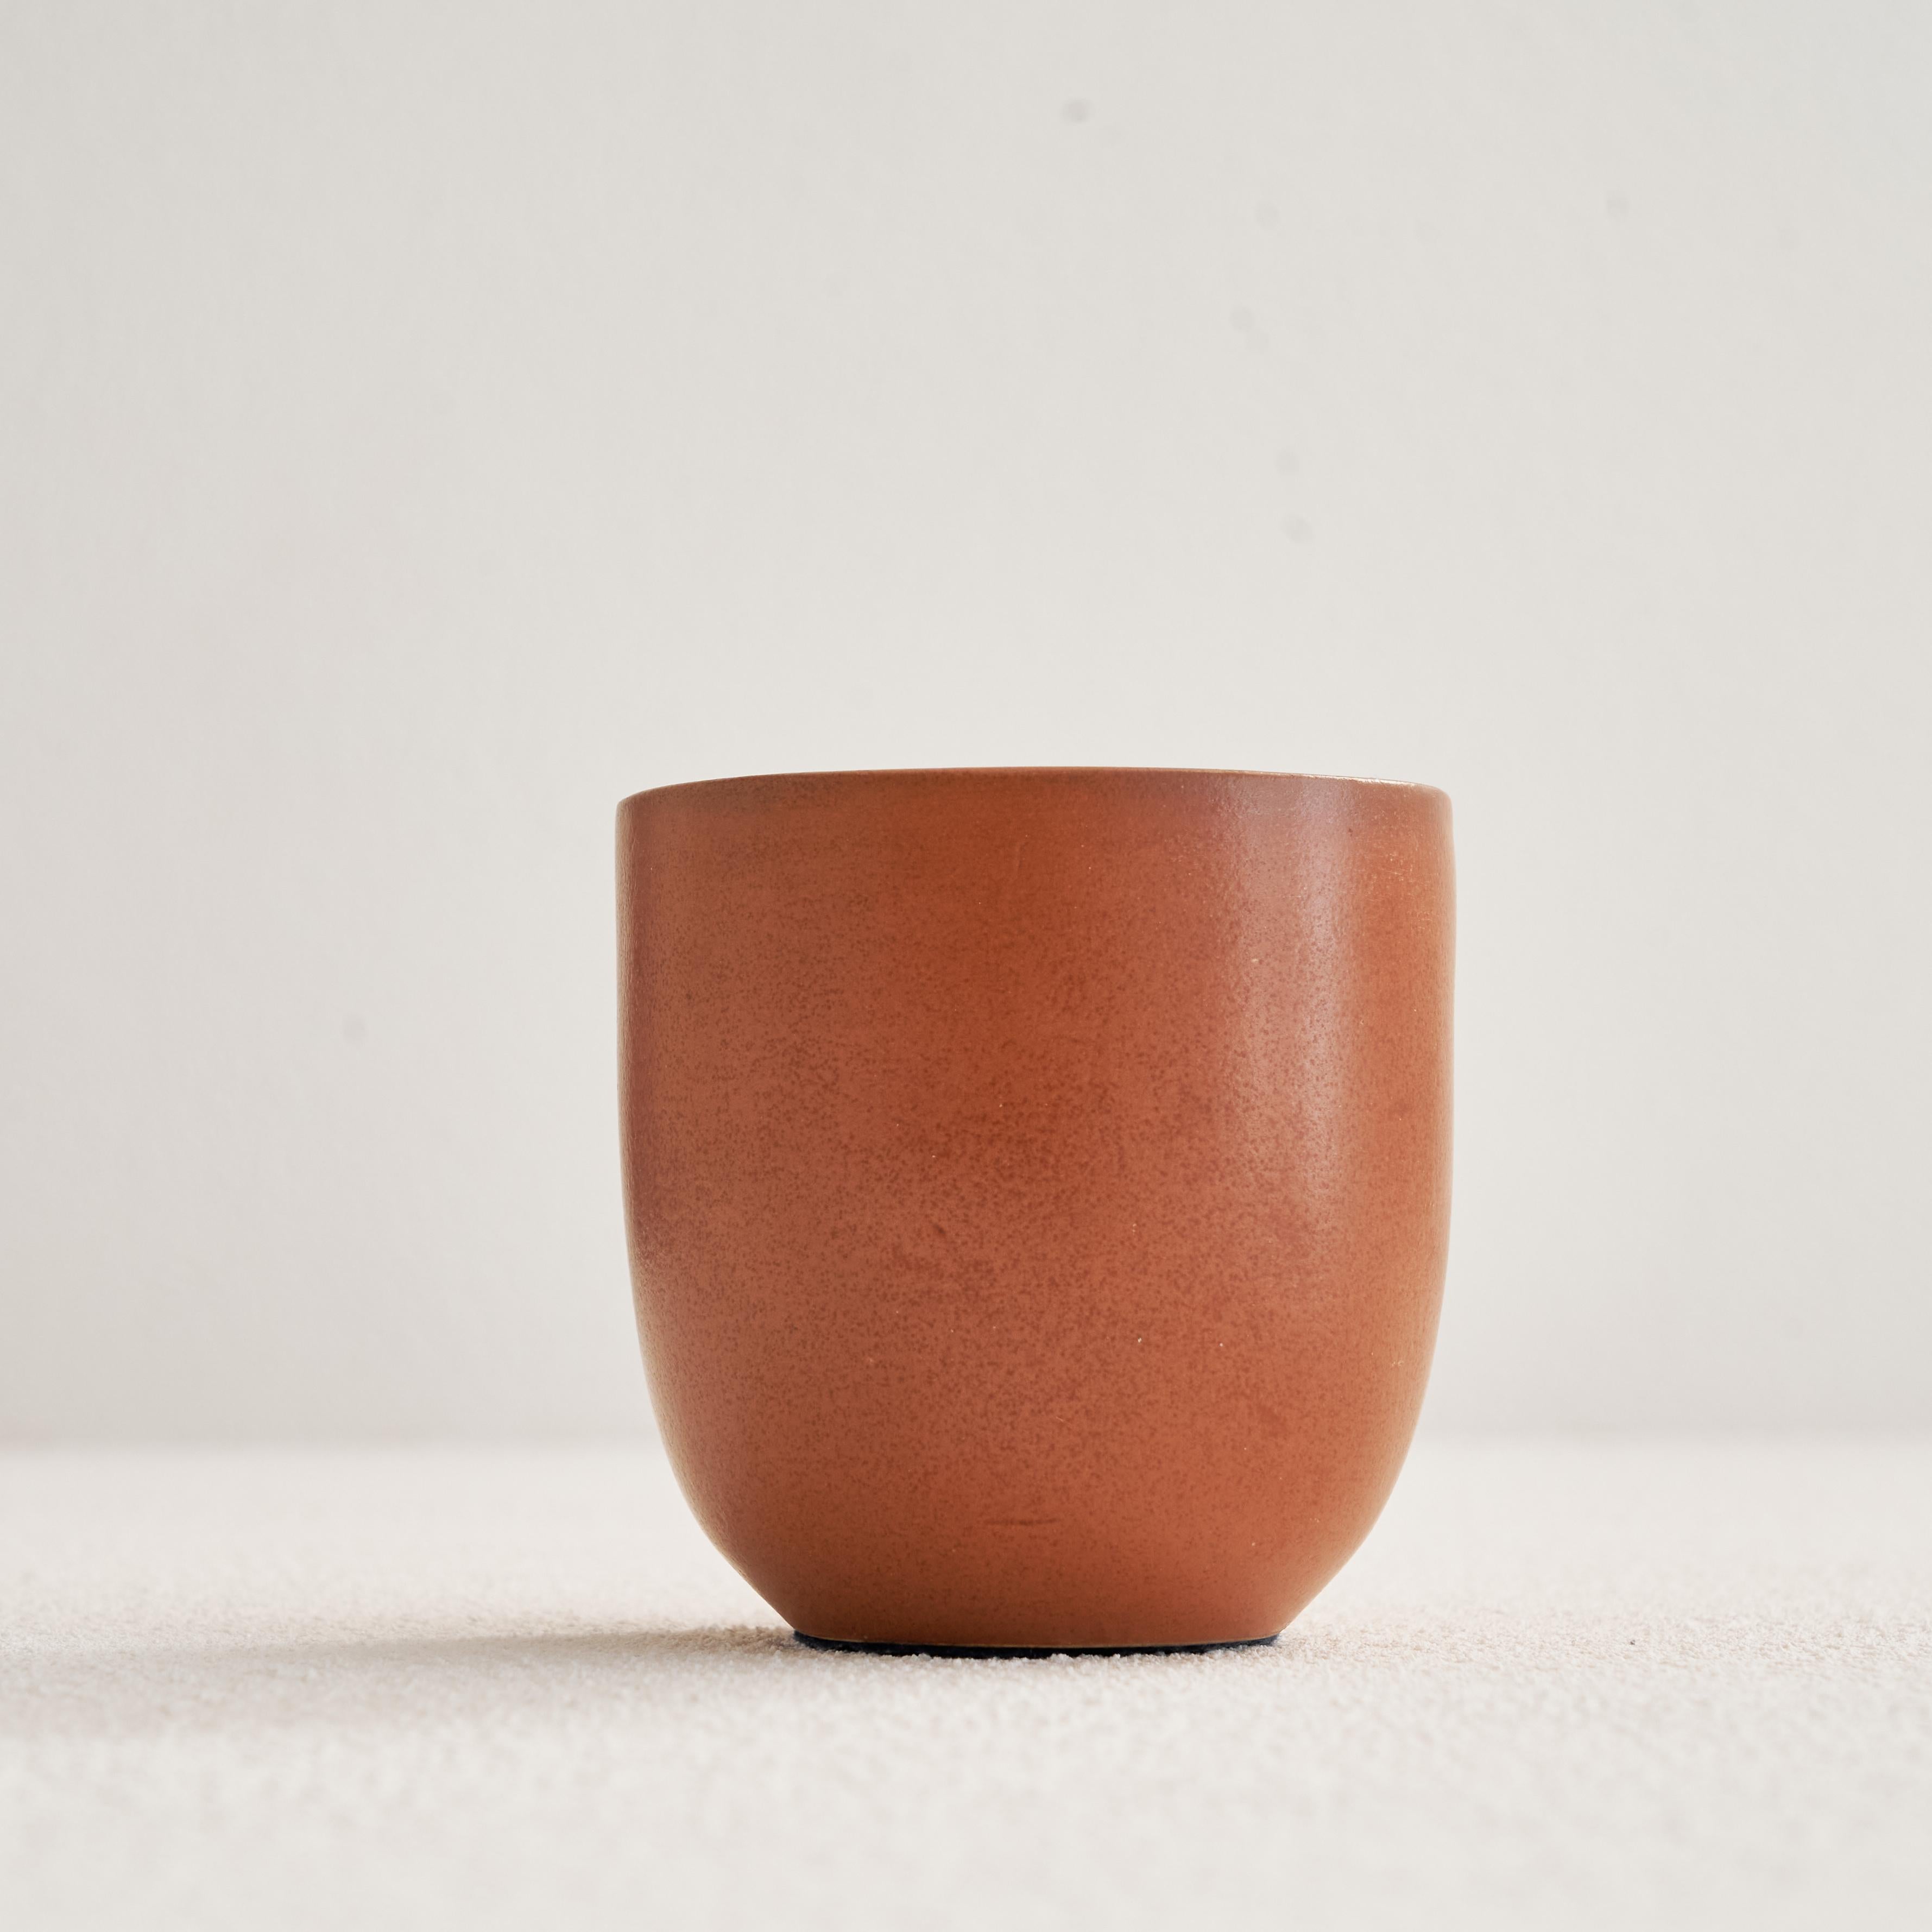 20th Century Gio Ponti for Richard Ginori Vase in Terracotta and Gold, 1930s For Sale